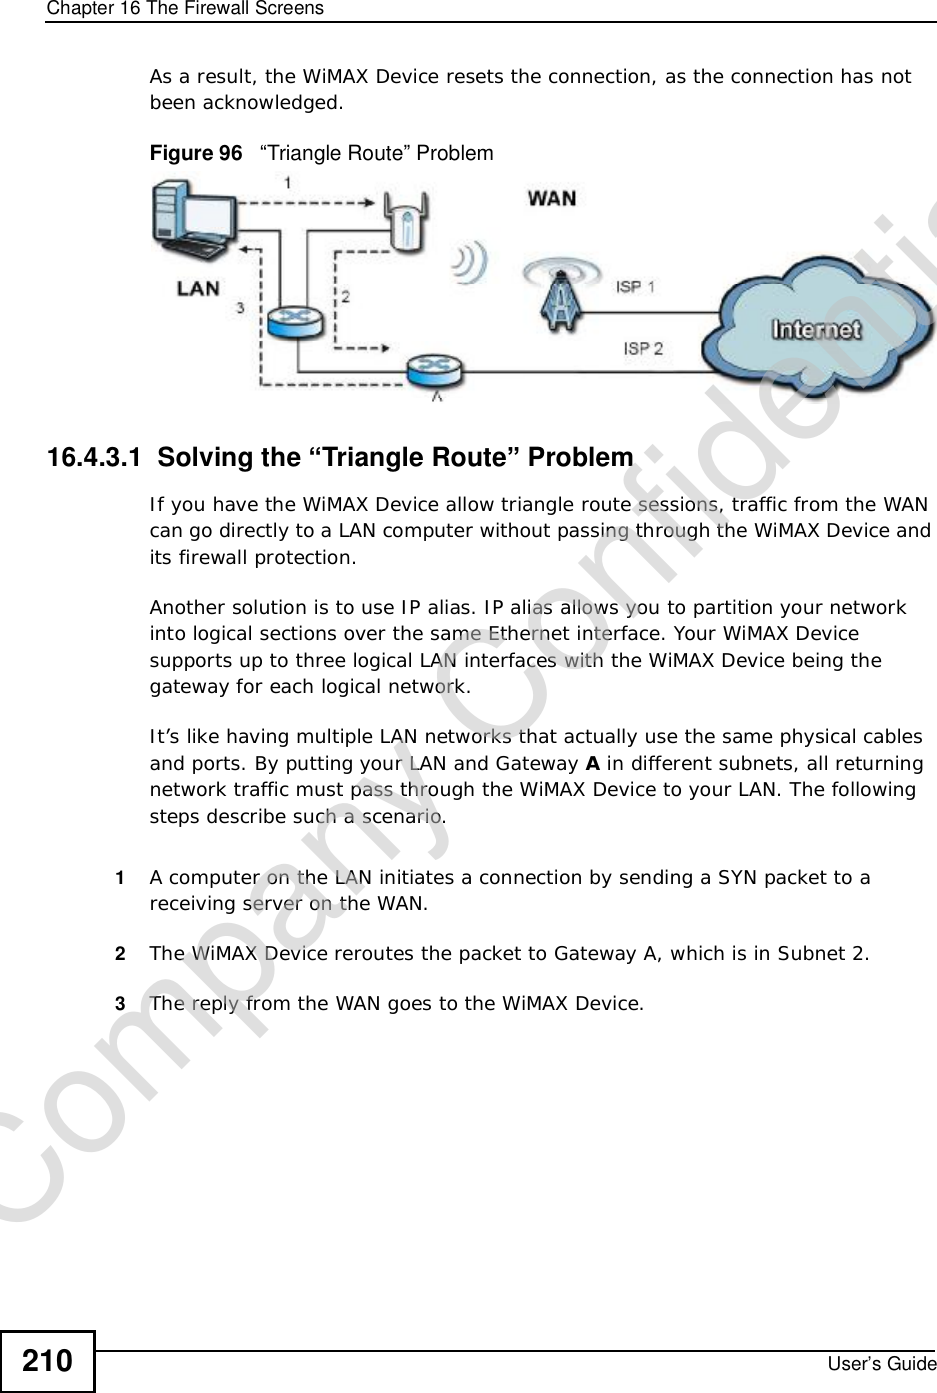 Chapter 16The Firewall ScreensUser’s Guide210As a result, the WiMAX Device resets the connection, as the connection has not been acknowledged.Figure 96   “Triangle Route” Problem16.4.3.1  Solving the “Triangle Route” ProblemIf you have the WiMAX Device allow triangle route sessions, traffic from the WAN can go directly to a LAN computer without passing through the WiMAX Device and its firewall protection. Another solution is to use IP alias. IP alias allows you to partition your network into logical sections over the same Ethernet interface. Your WiMAX Device supports up to three logical LAN interfaces with the WiMAX Device being the gateway for each logical network. It’s like having multiple LAN networks that actually use the same physical cables and ports. By putting your LAN and Gateway A in different subnets, all returning network traffic must pass through the WiMAX Device to your LAN. The following steps describe such a scenario.1A computer on the LAN initiates a connection by sending a SYN packet to a receiving server on the WAN. 2The WiMAX Devicereroutes the packet to Gateway A, which is in Subnet 2. 3The reply from the WAN goes to the WiMAX Device. Company Confidential